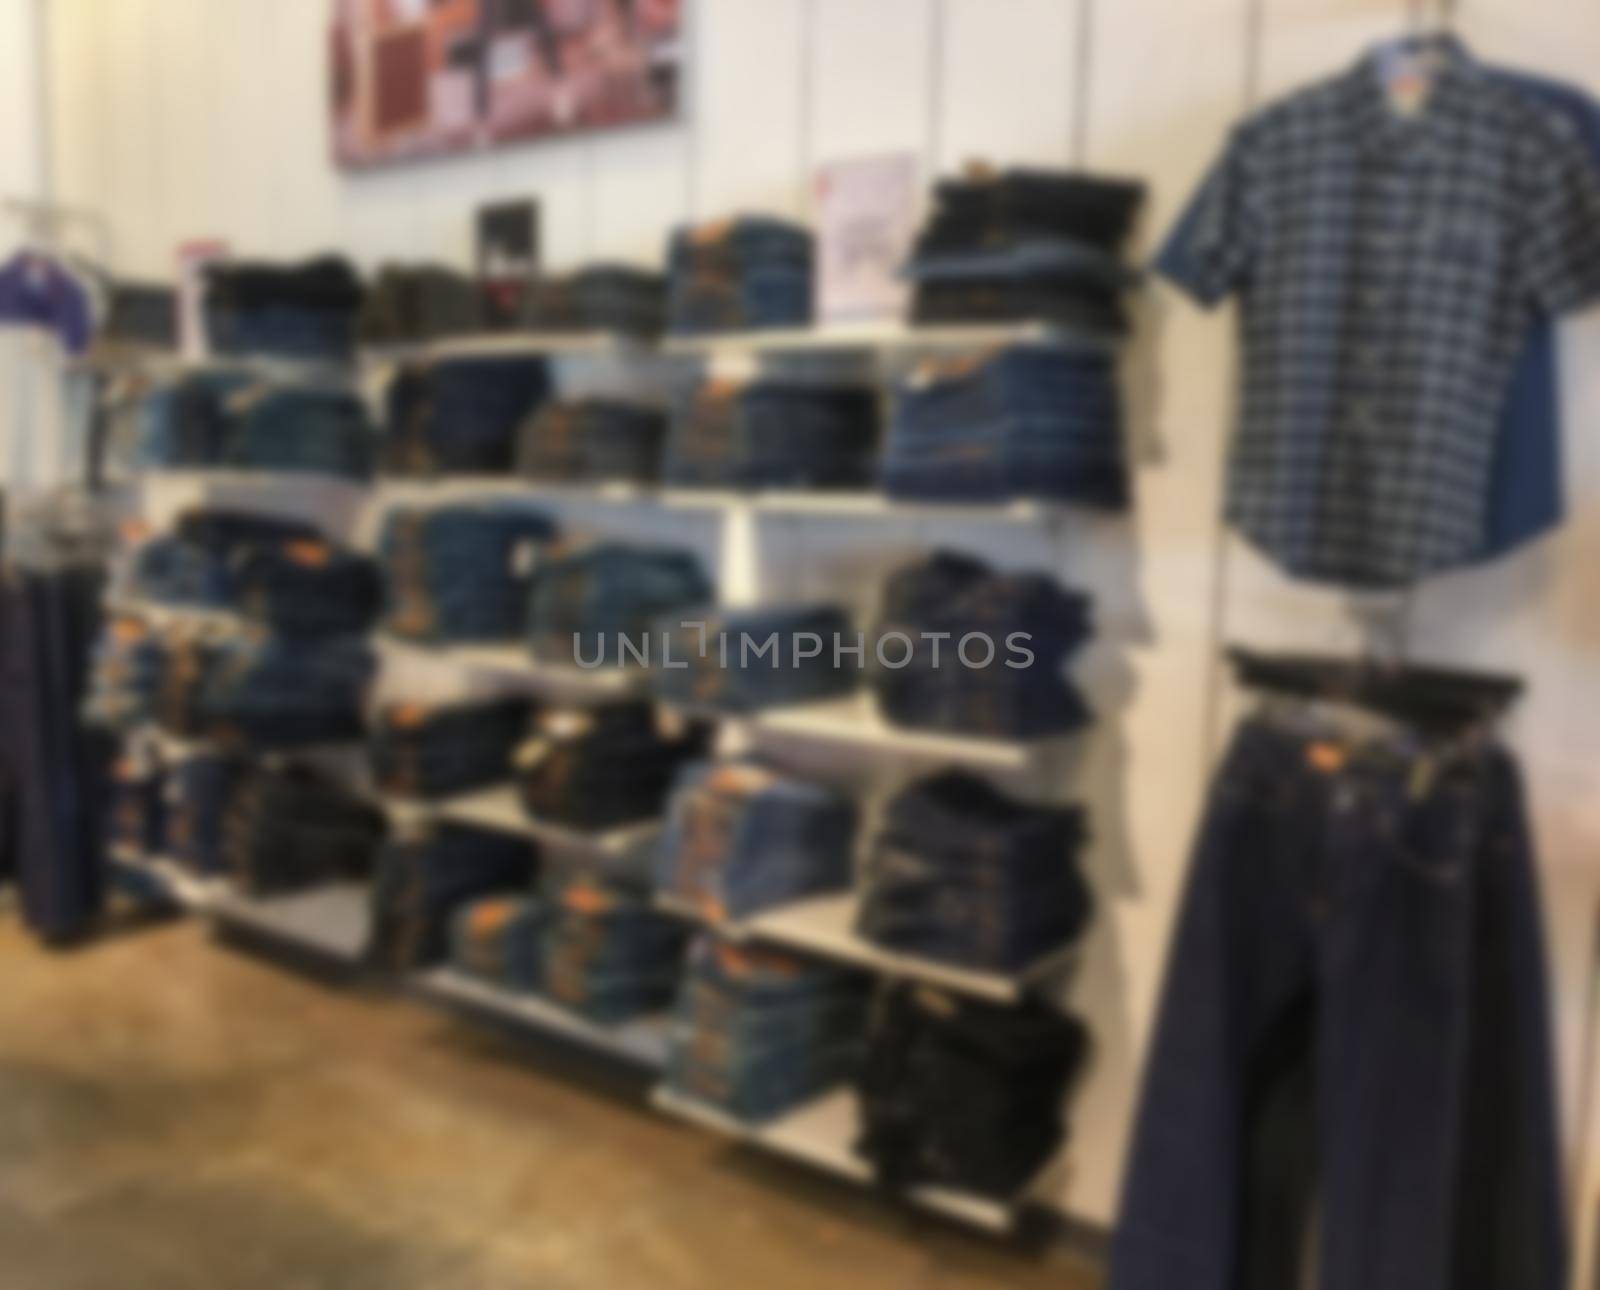 Blurred image of a clothing store by geargodz